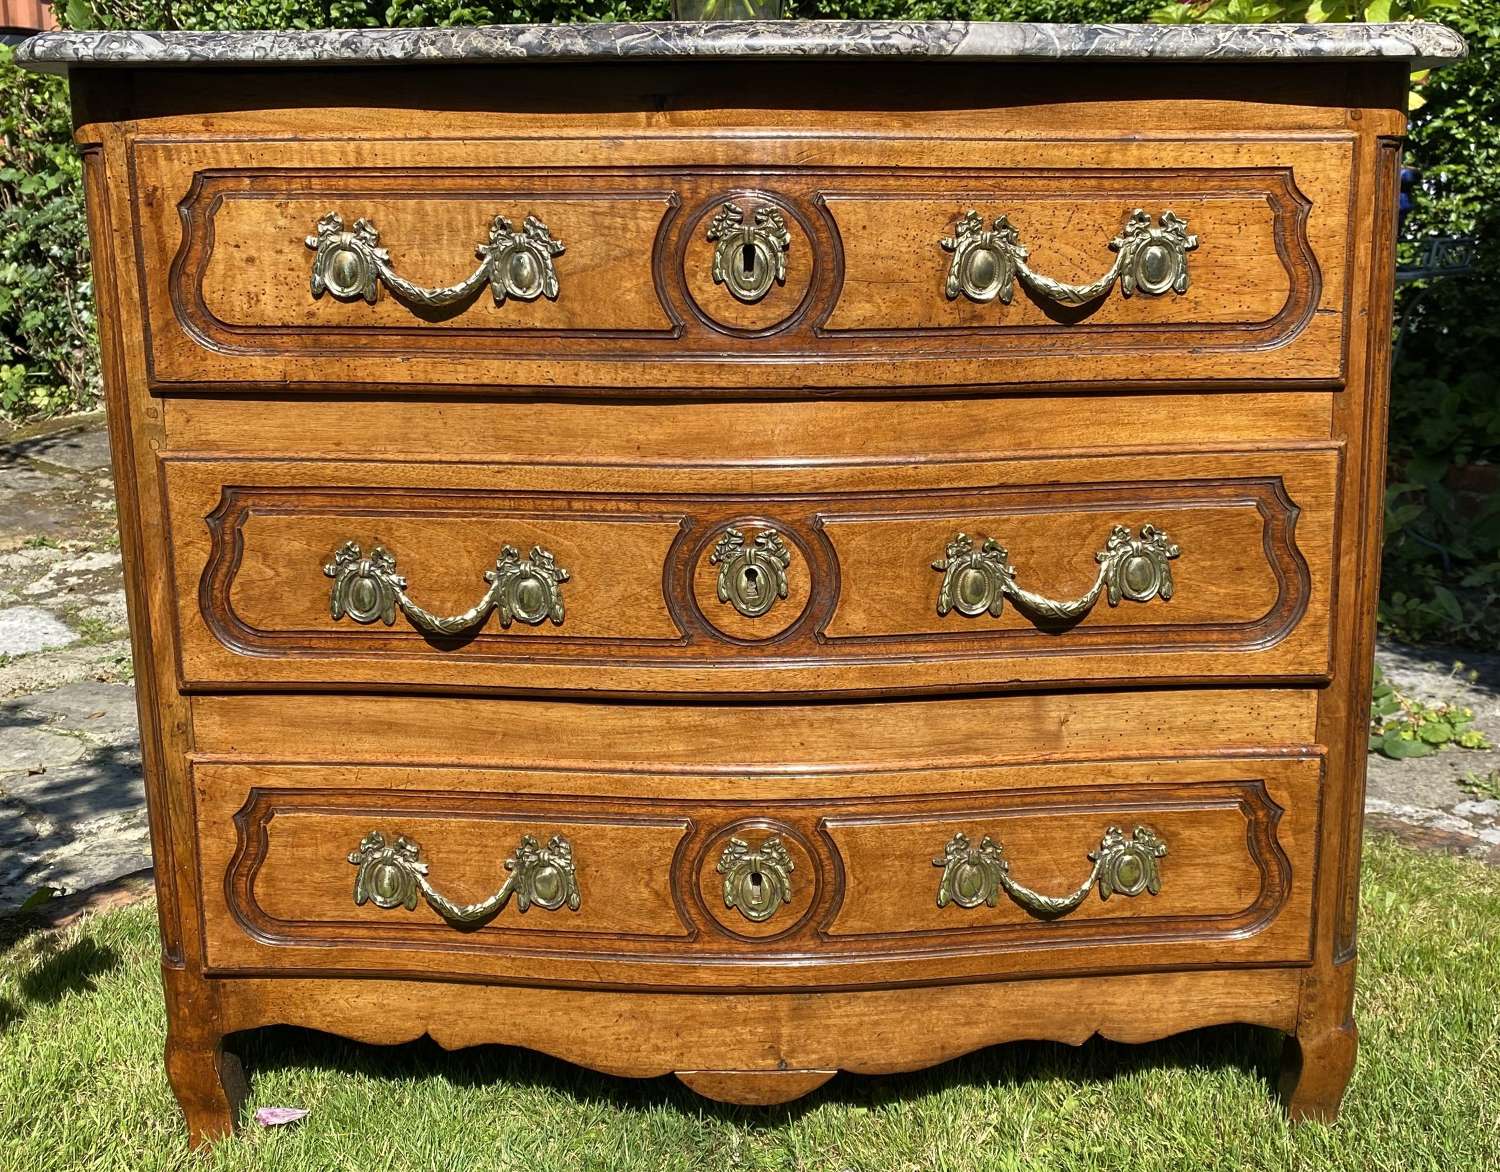 Small 18th Century serpentine fronted commode in walnut